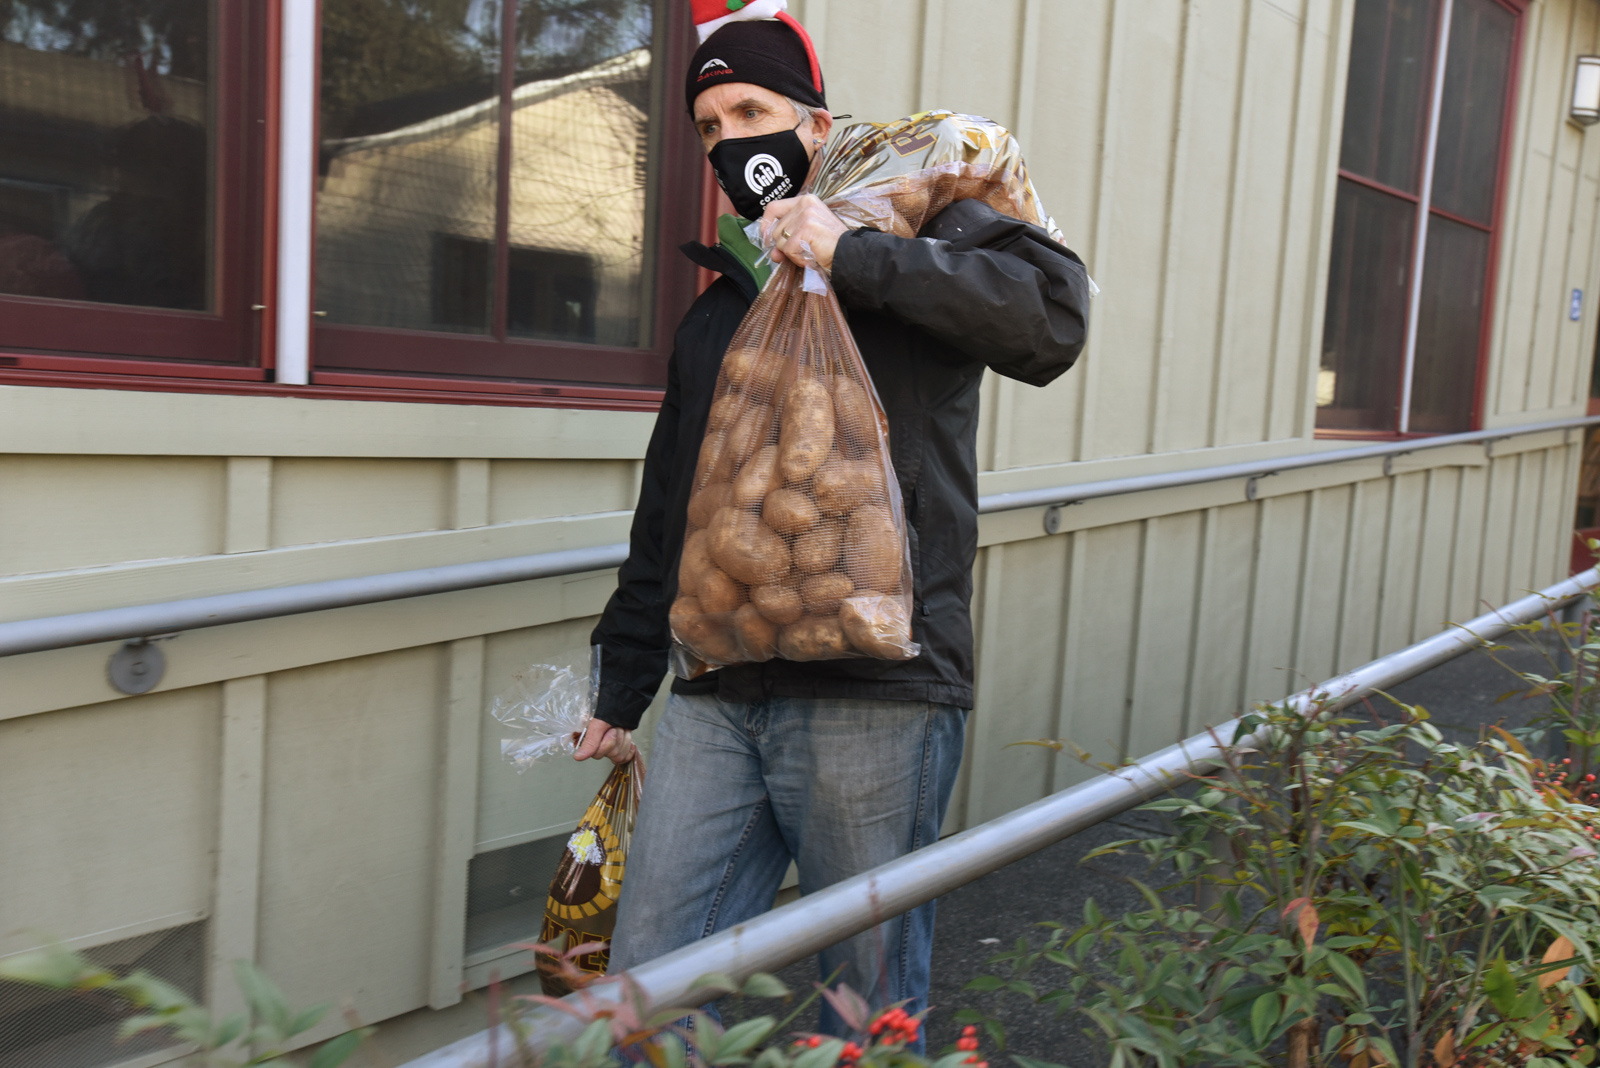 California Homemakers Association volunteer carrying three bags filled with russet potatoes.